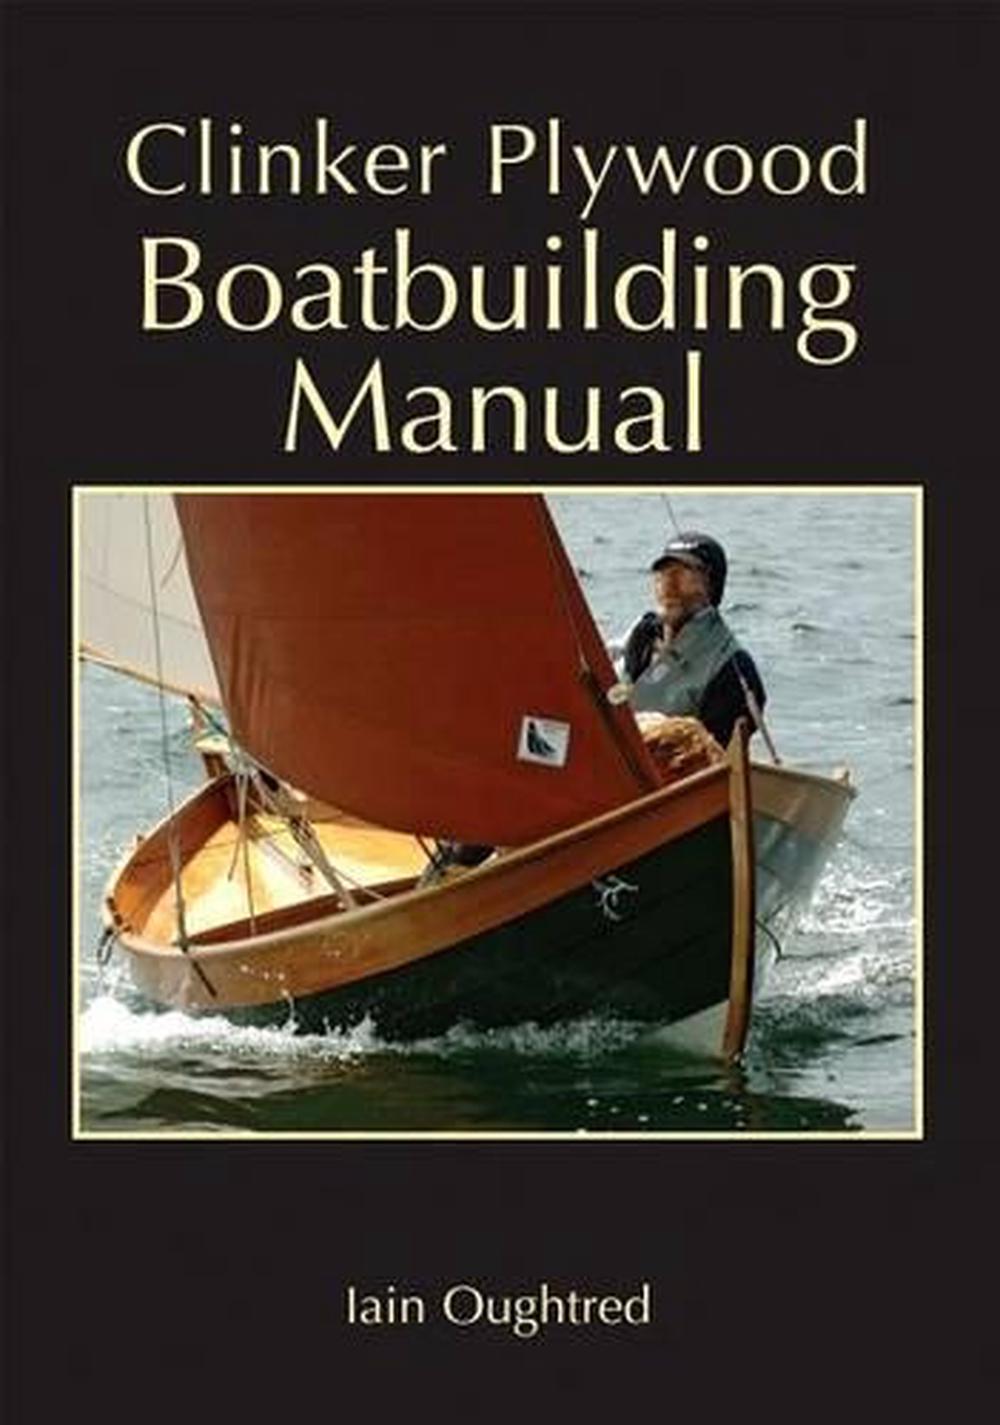 Clinker Plywood Boatbuilding Manual by Iain Oughtred ...